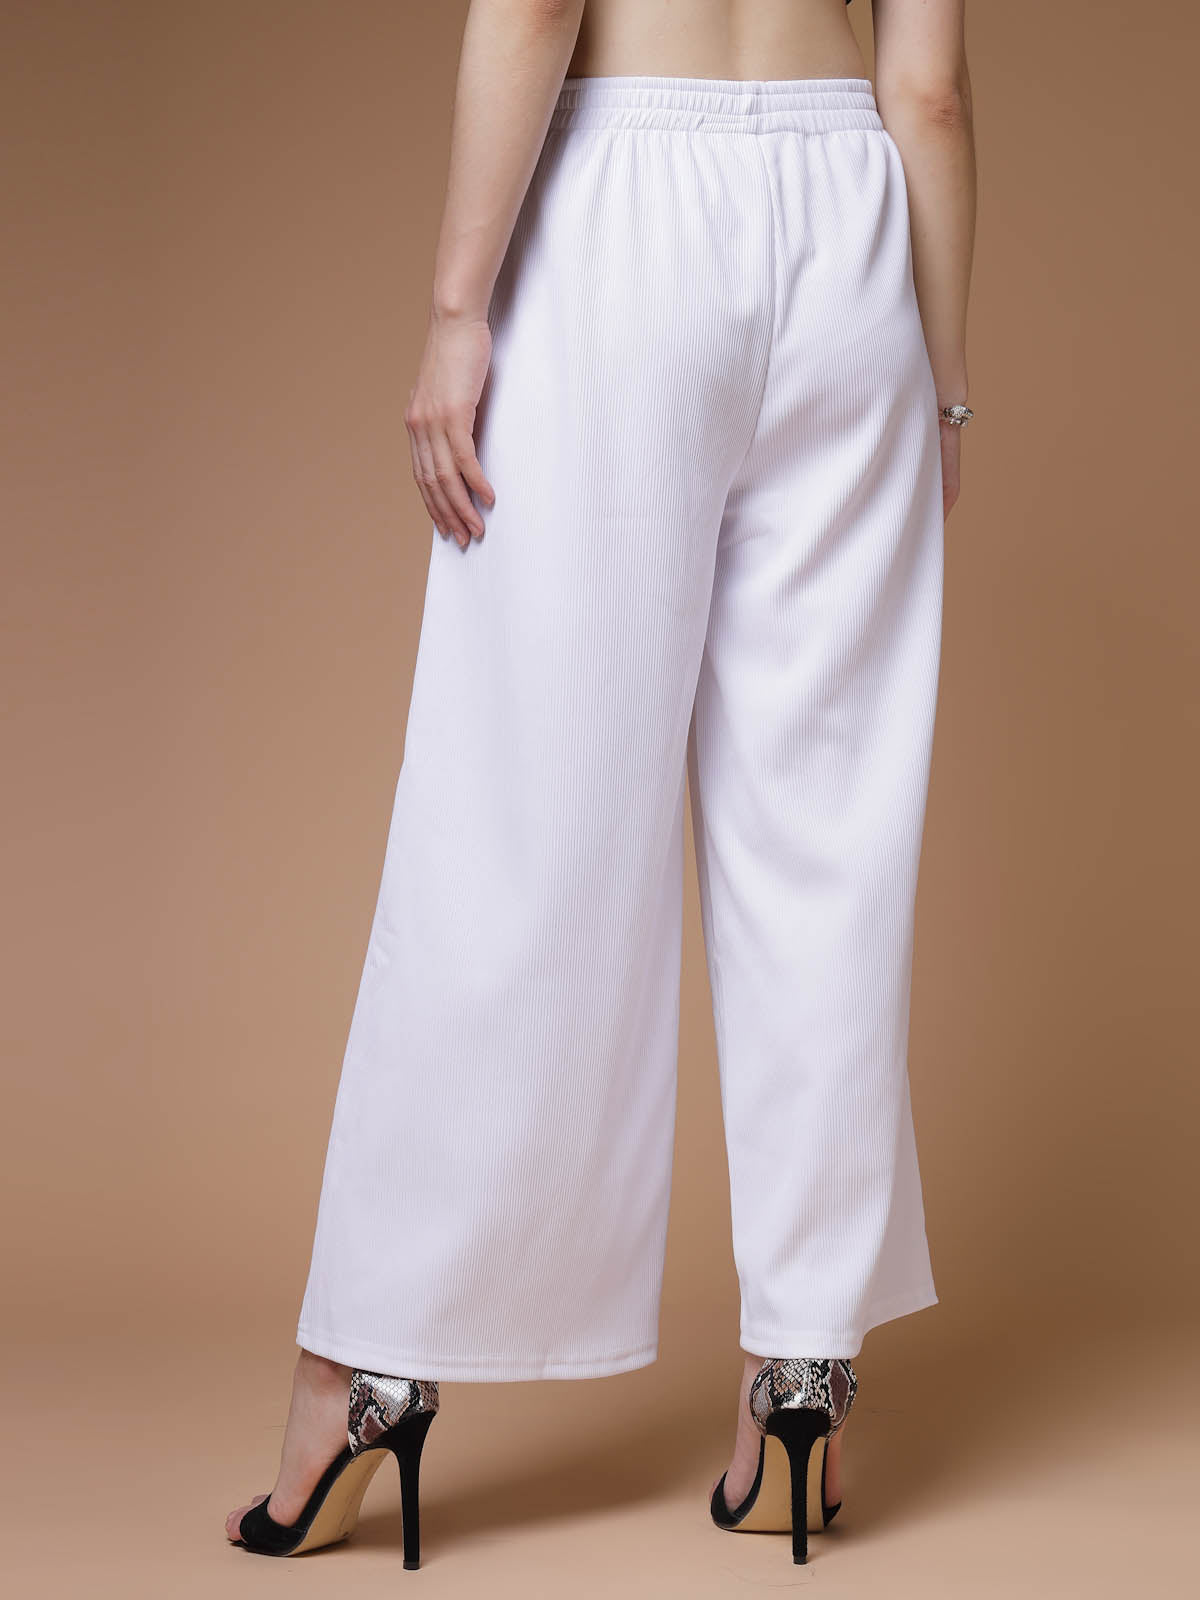 Outlet WHBM Mid-Rise Utility Crop Pants | White House Black Market